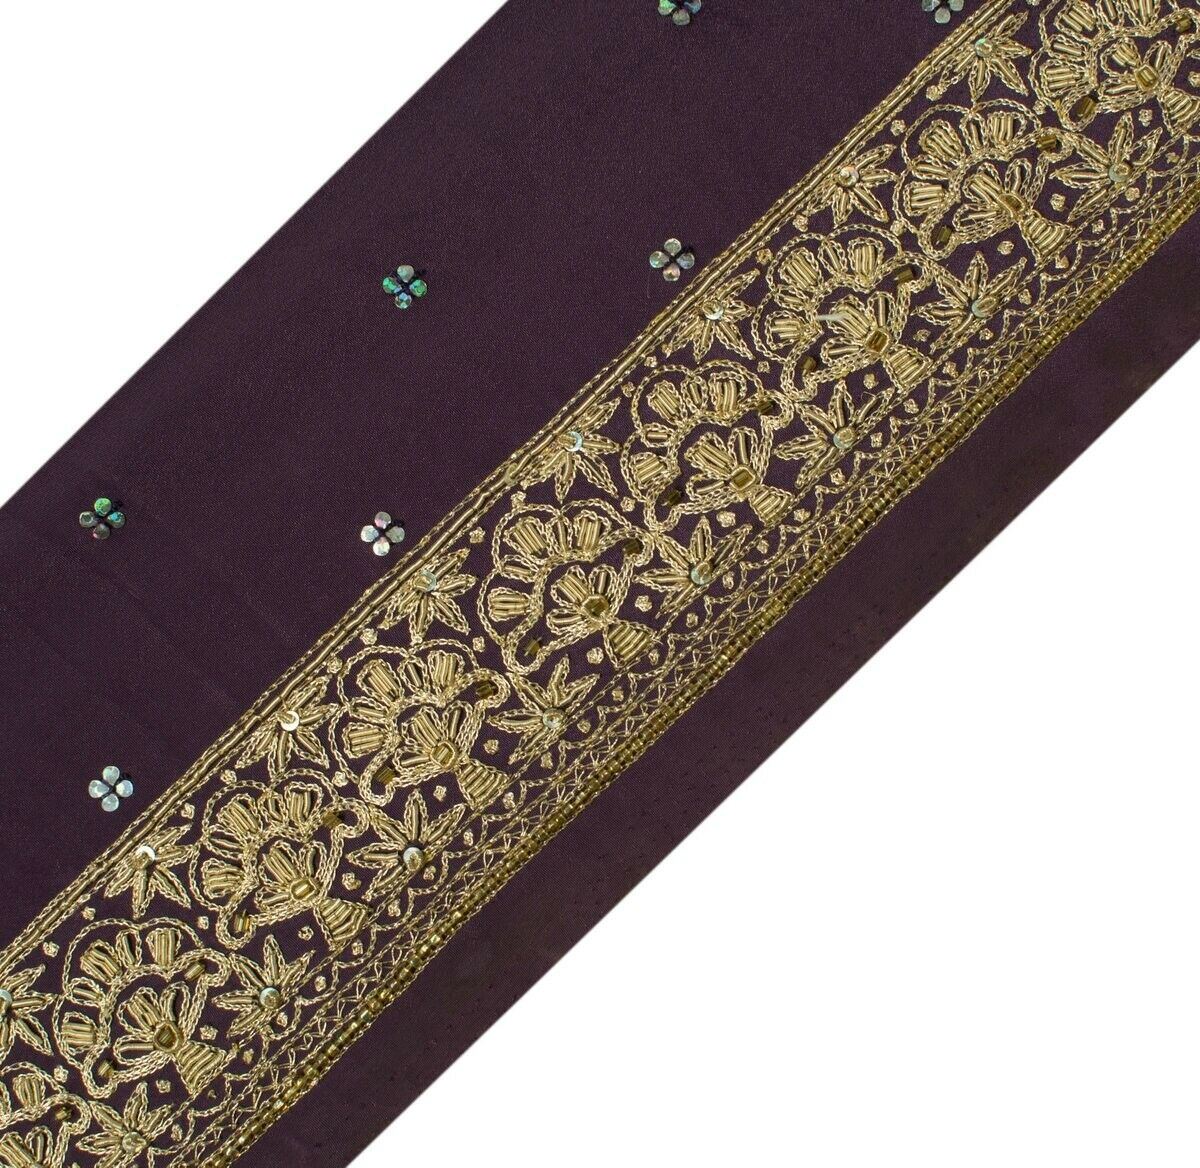 Vintage Sari Border Indian Craft Sewing Trim Hand Beaded Embroidered Ribbon Lace